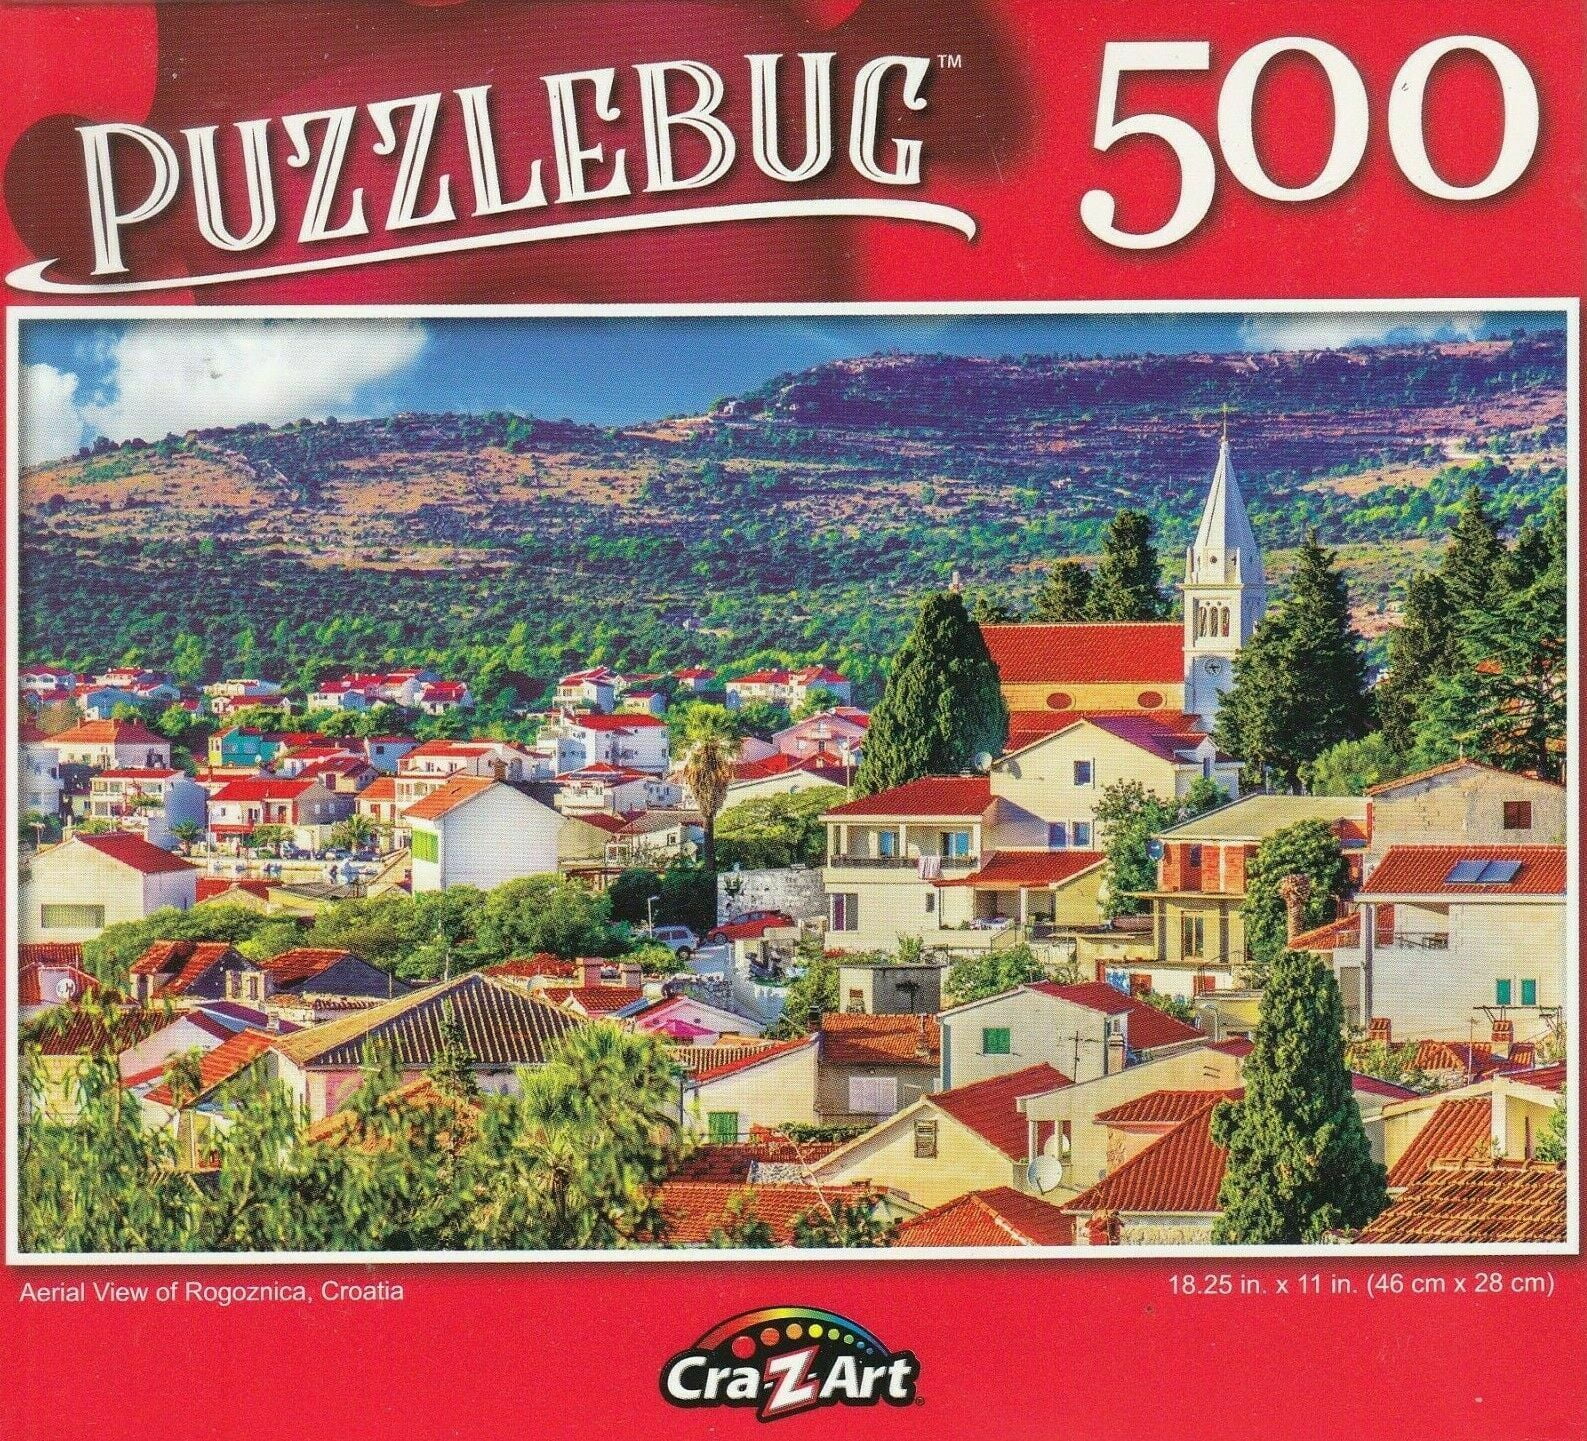 Lot of 5 Puzzlebug 500 piece Jigsaw Puzzles Your pick!!! 